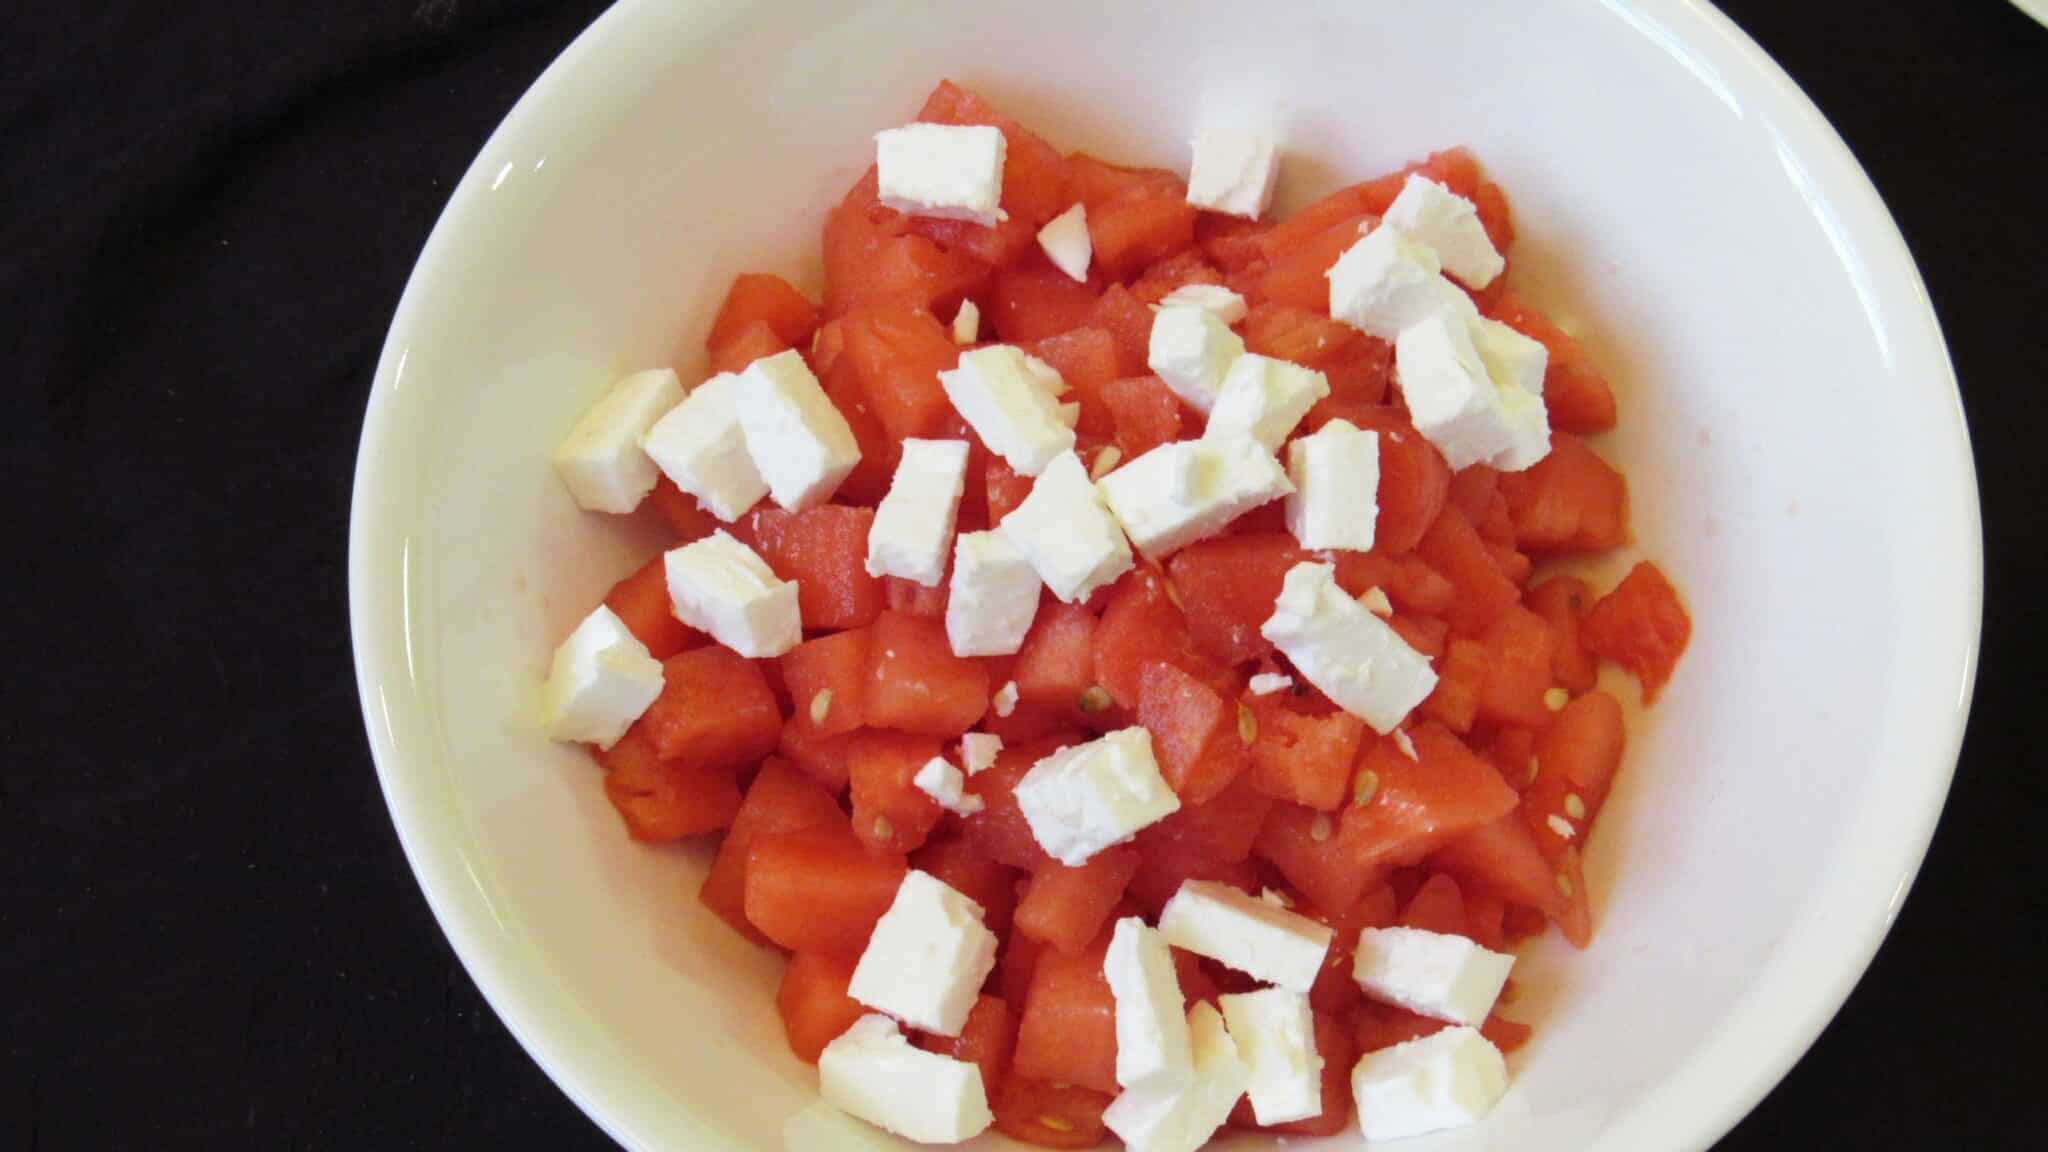 Diced watermelon and diced feta cheese in a white bowl.